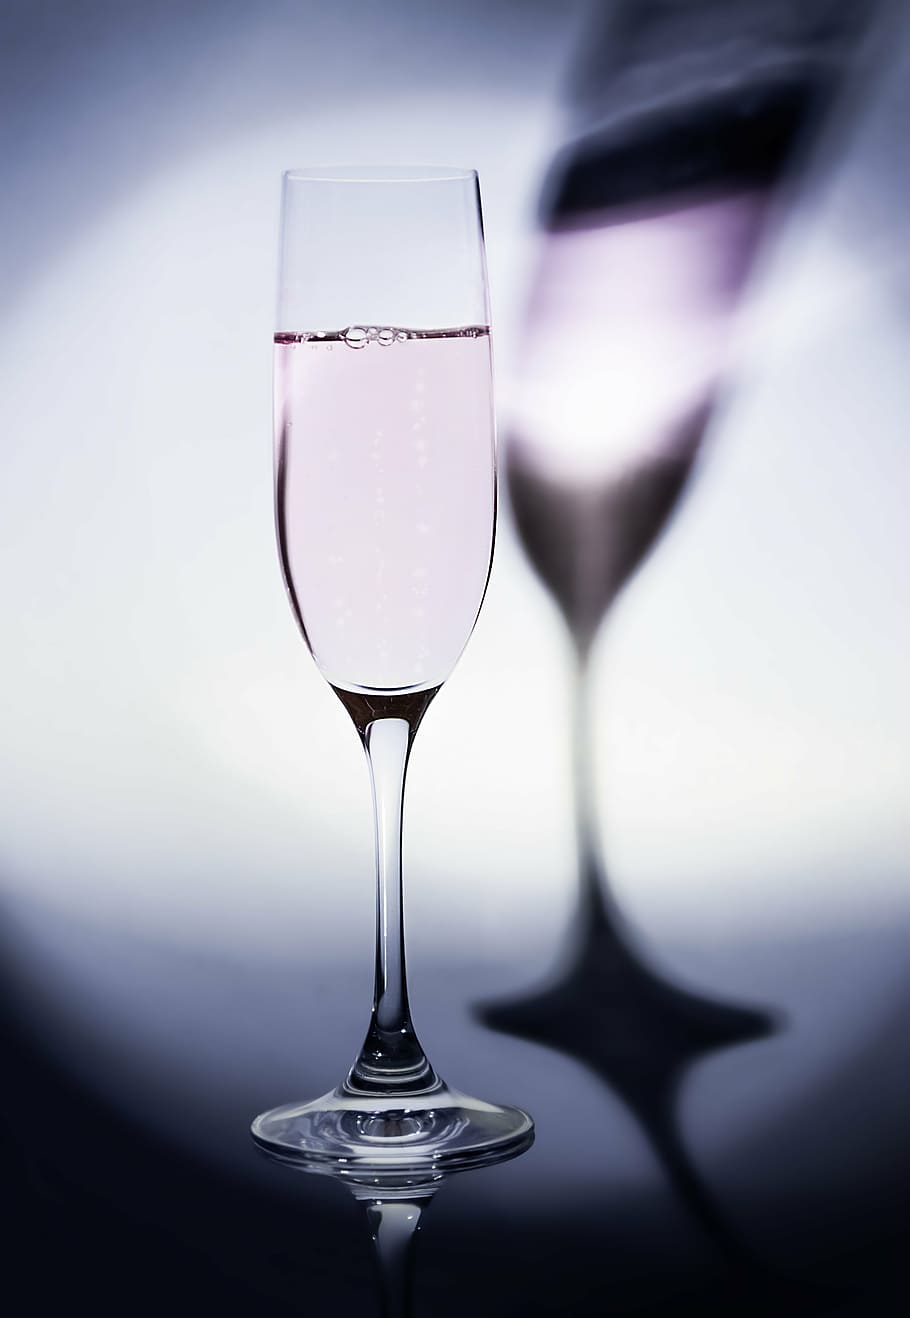 clear, long-stemmed, wine glass, filled, pink, liquid, champagne, shadow, light, glass